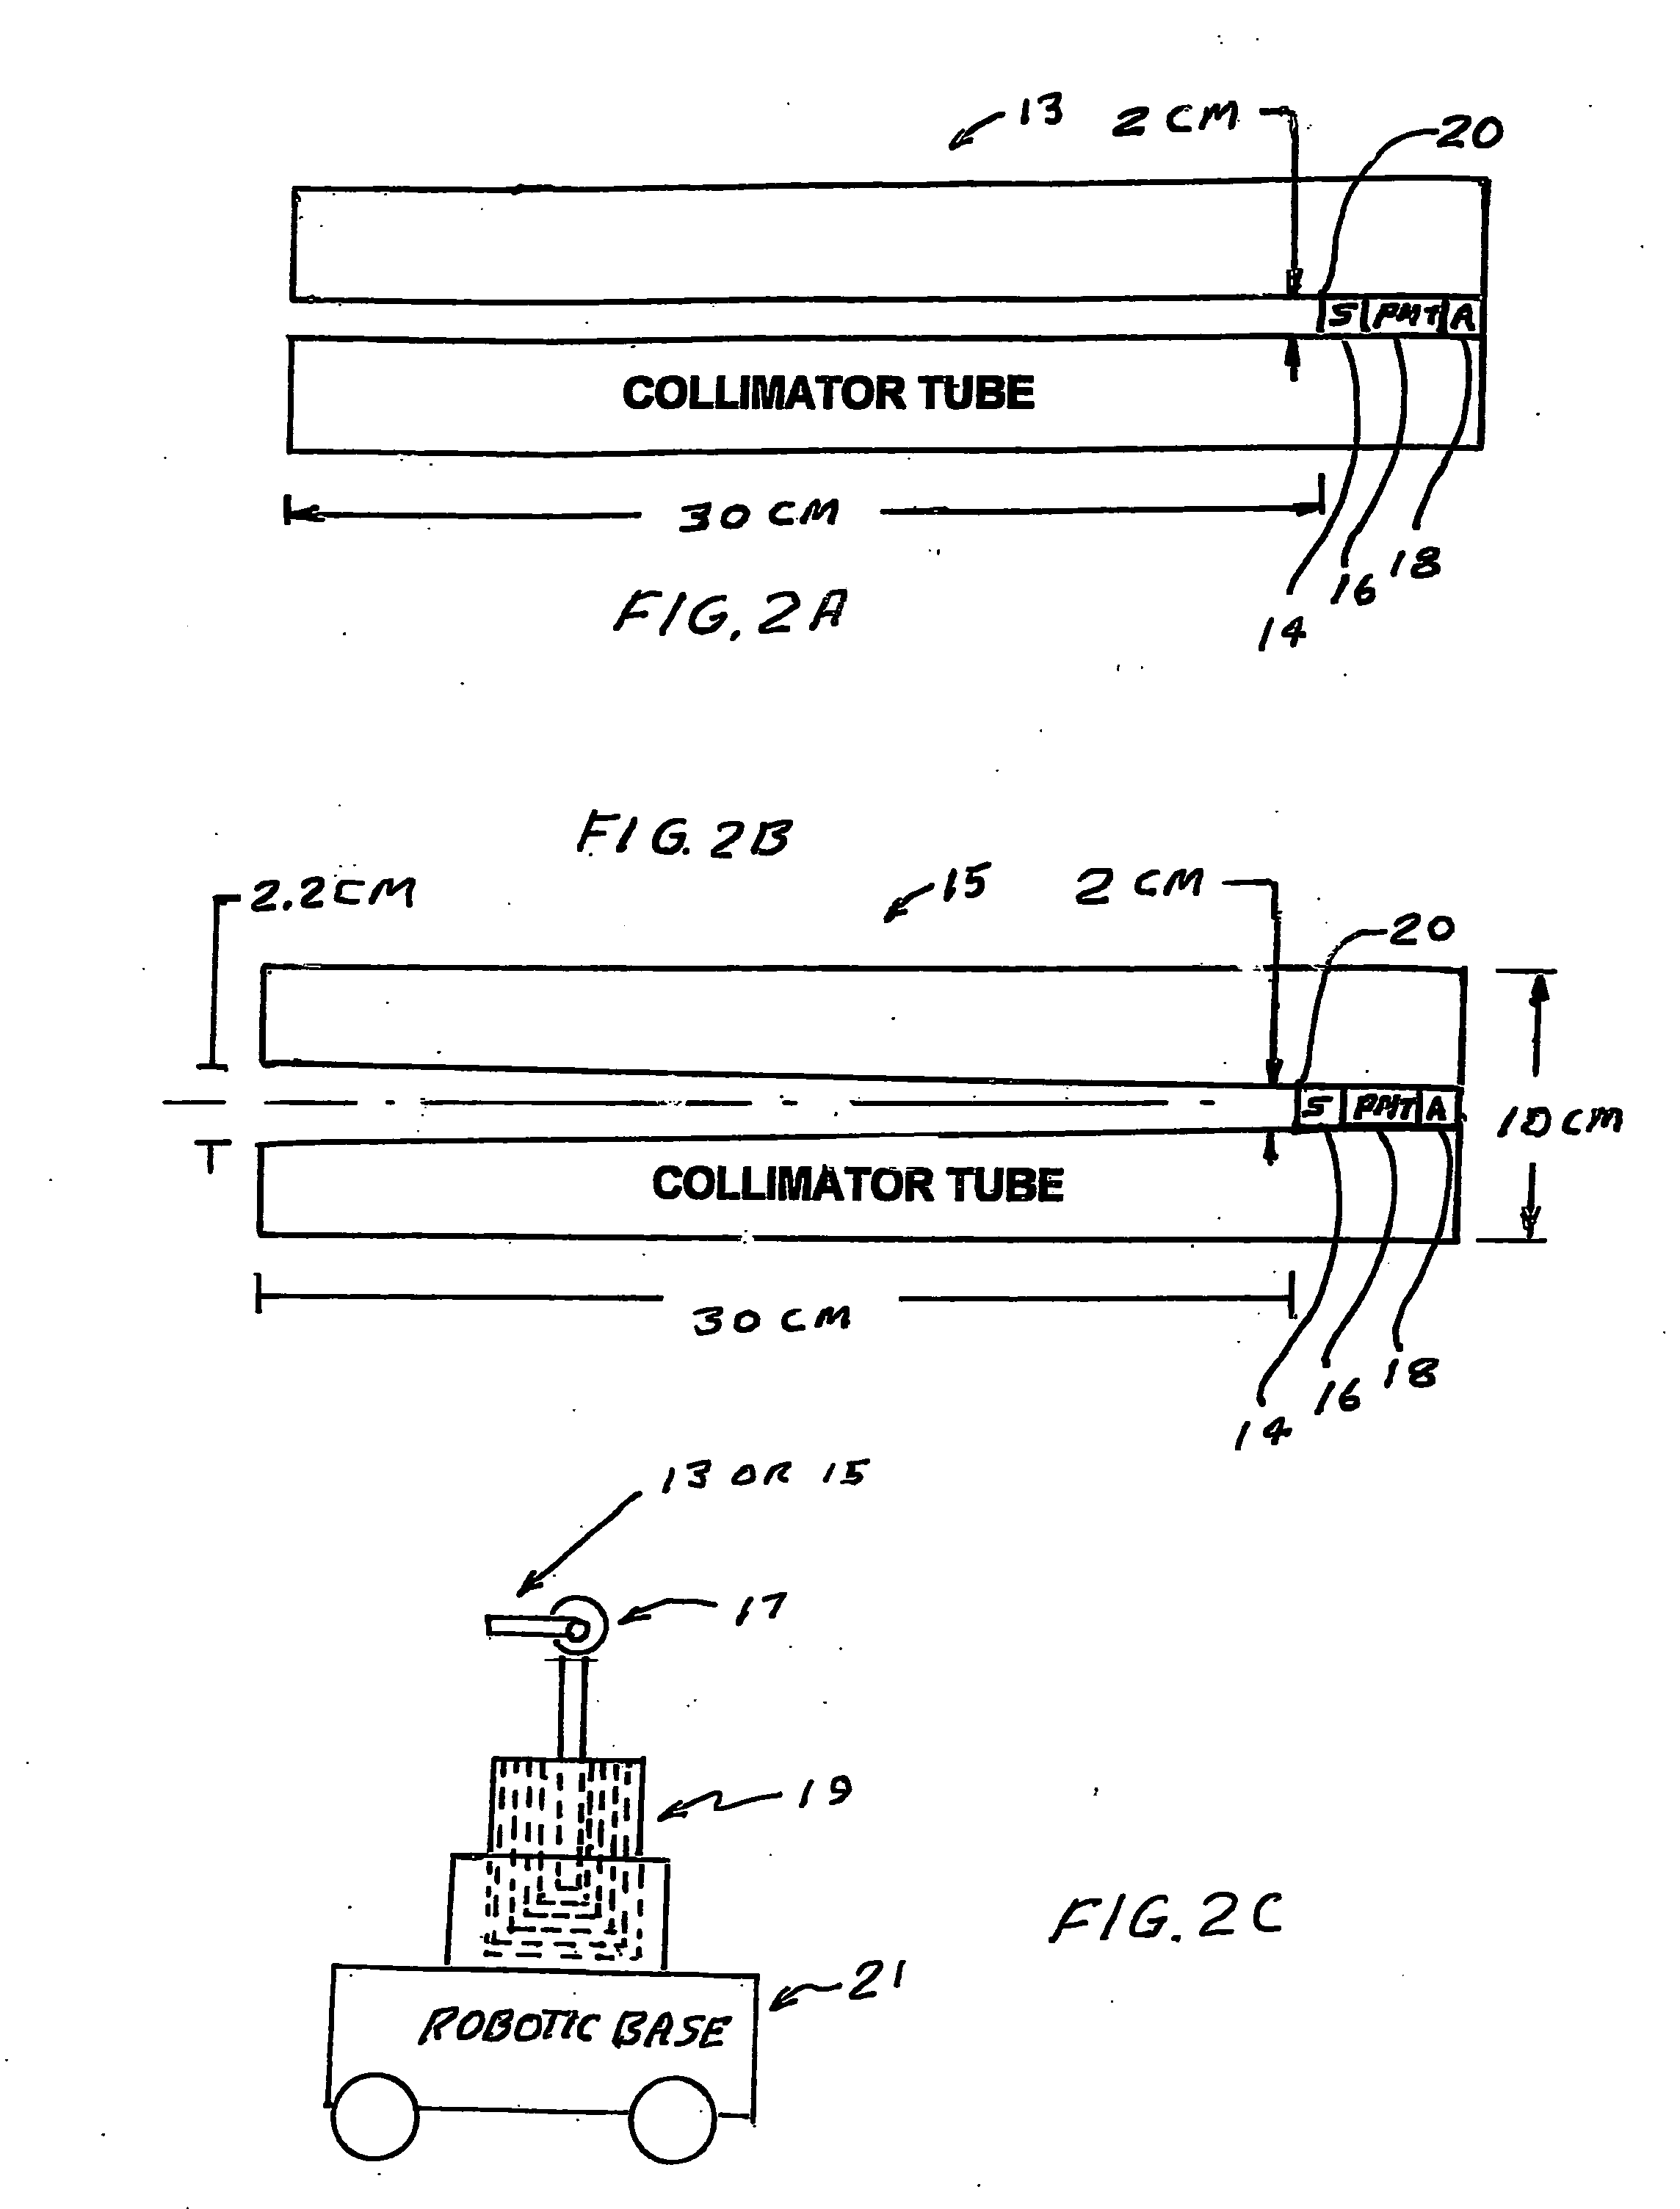 Radiation-monitoring diagnostic hodoscope system for nuclear-power reactors